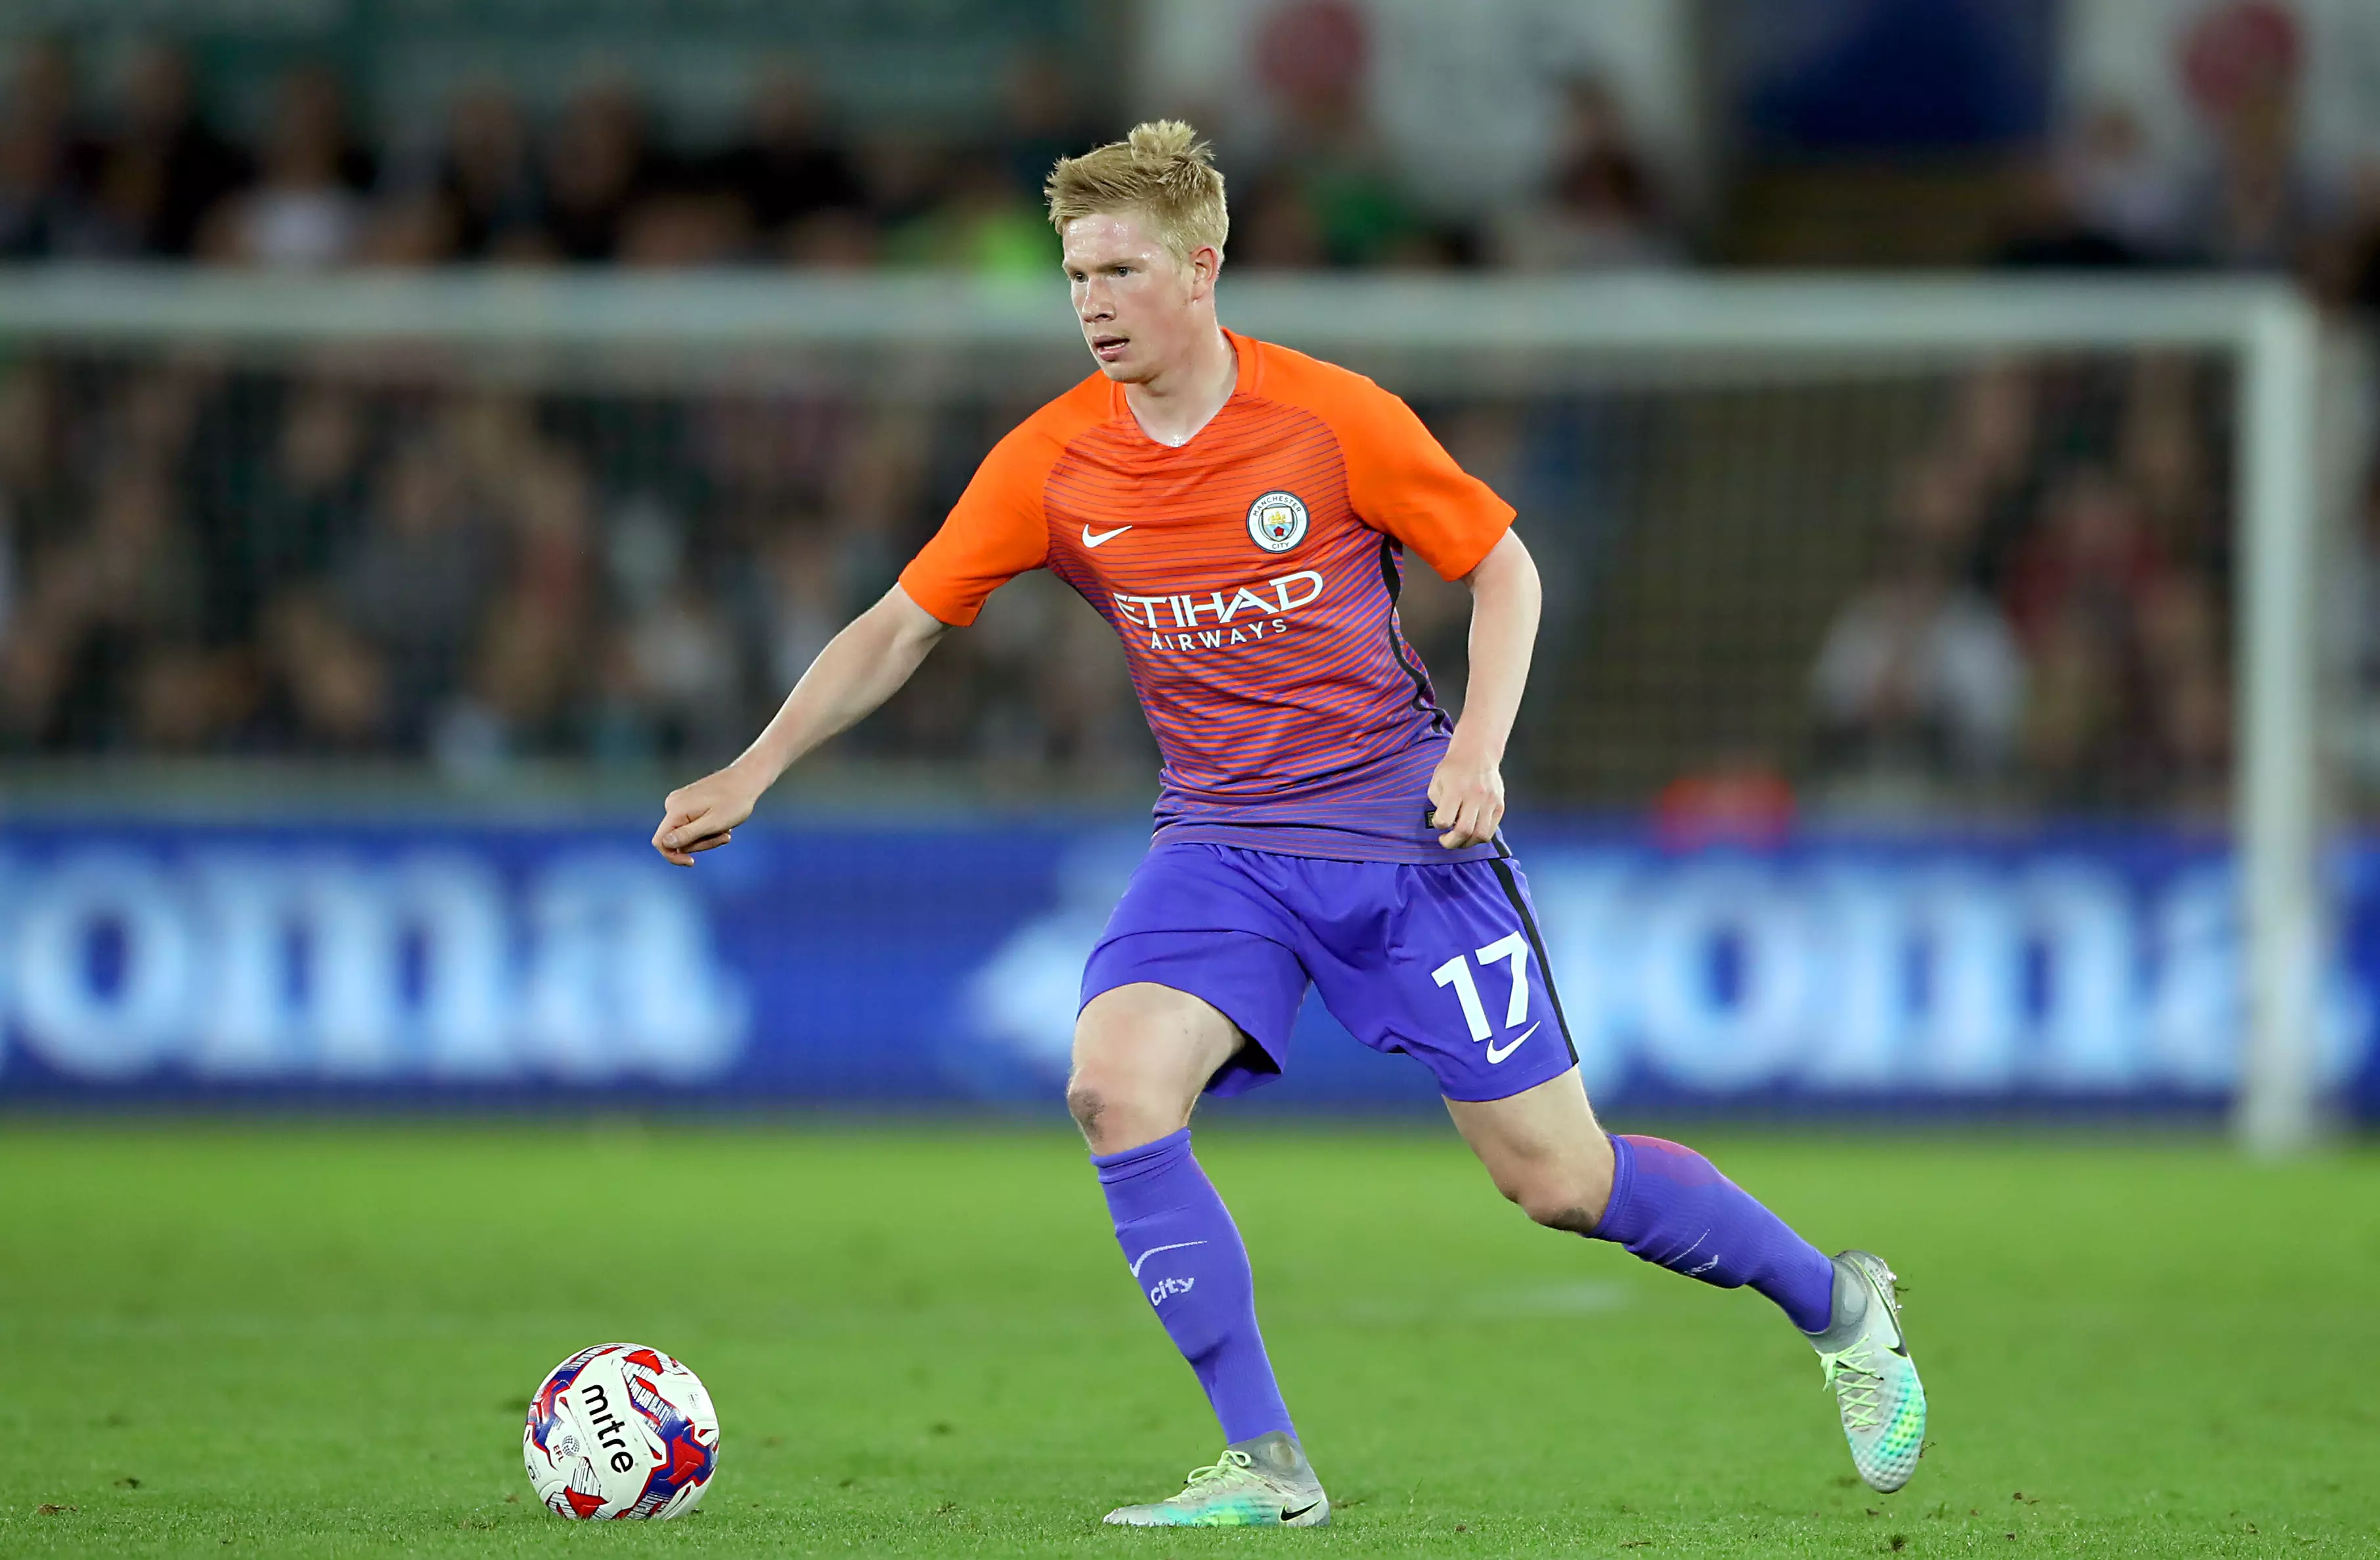 De Bruyne has become arguably City's most important player since signing for the club in 2015. Images: PA